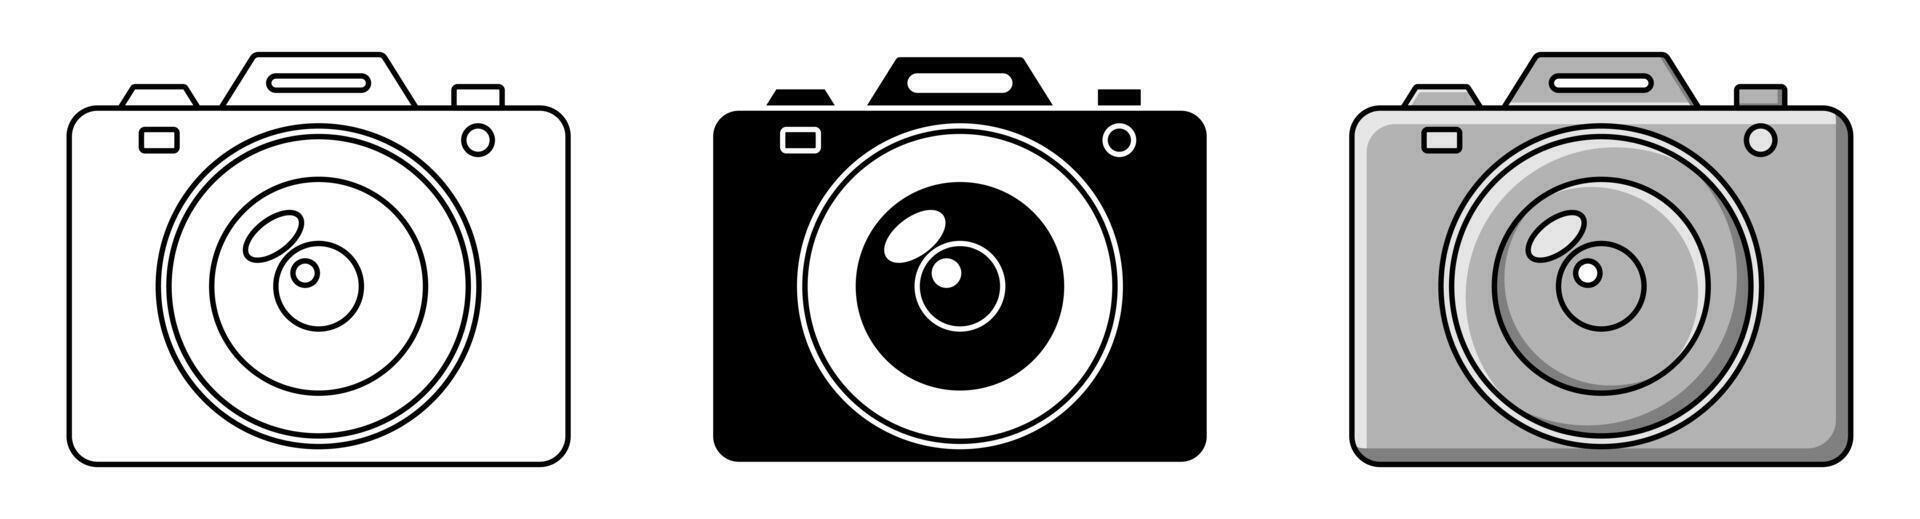 Camera Icon Set. Trendy and Modern Vector Isolated on White Background. Design for Apps, Web, Posters, Social Media.